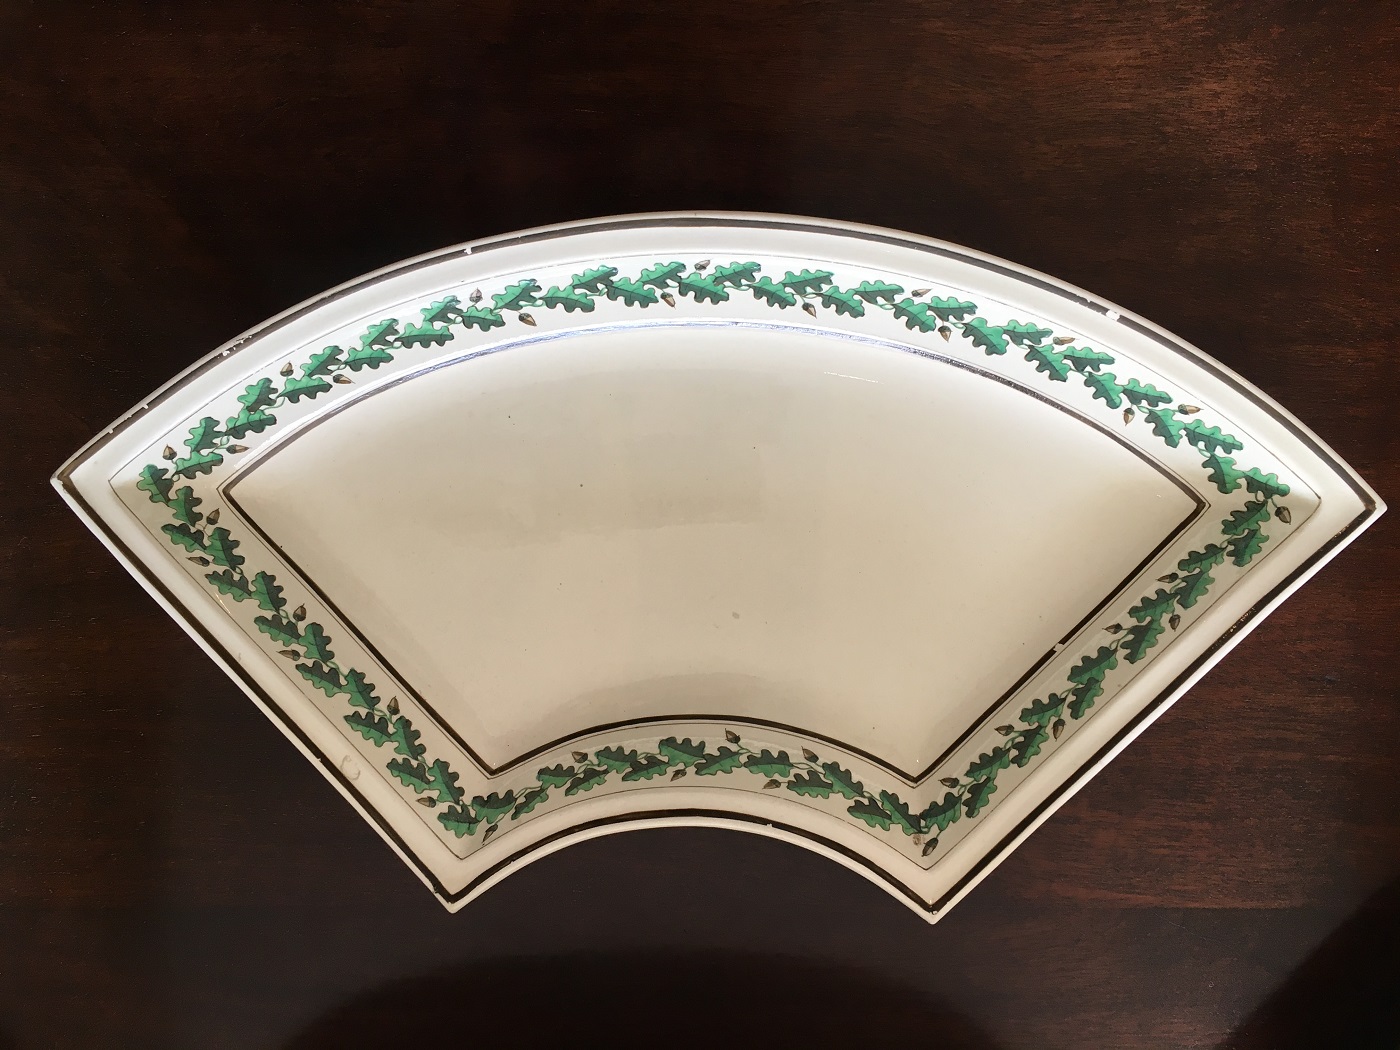 A quarter circle shaped Wedgwood serving dish with an oak leaf patterned border